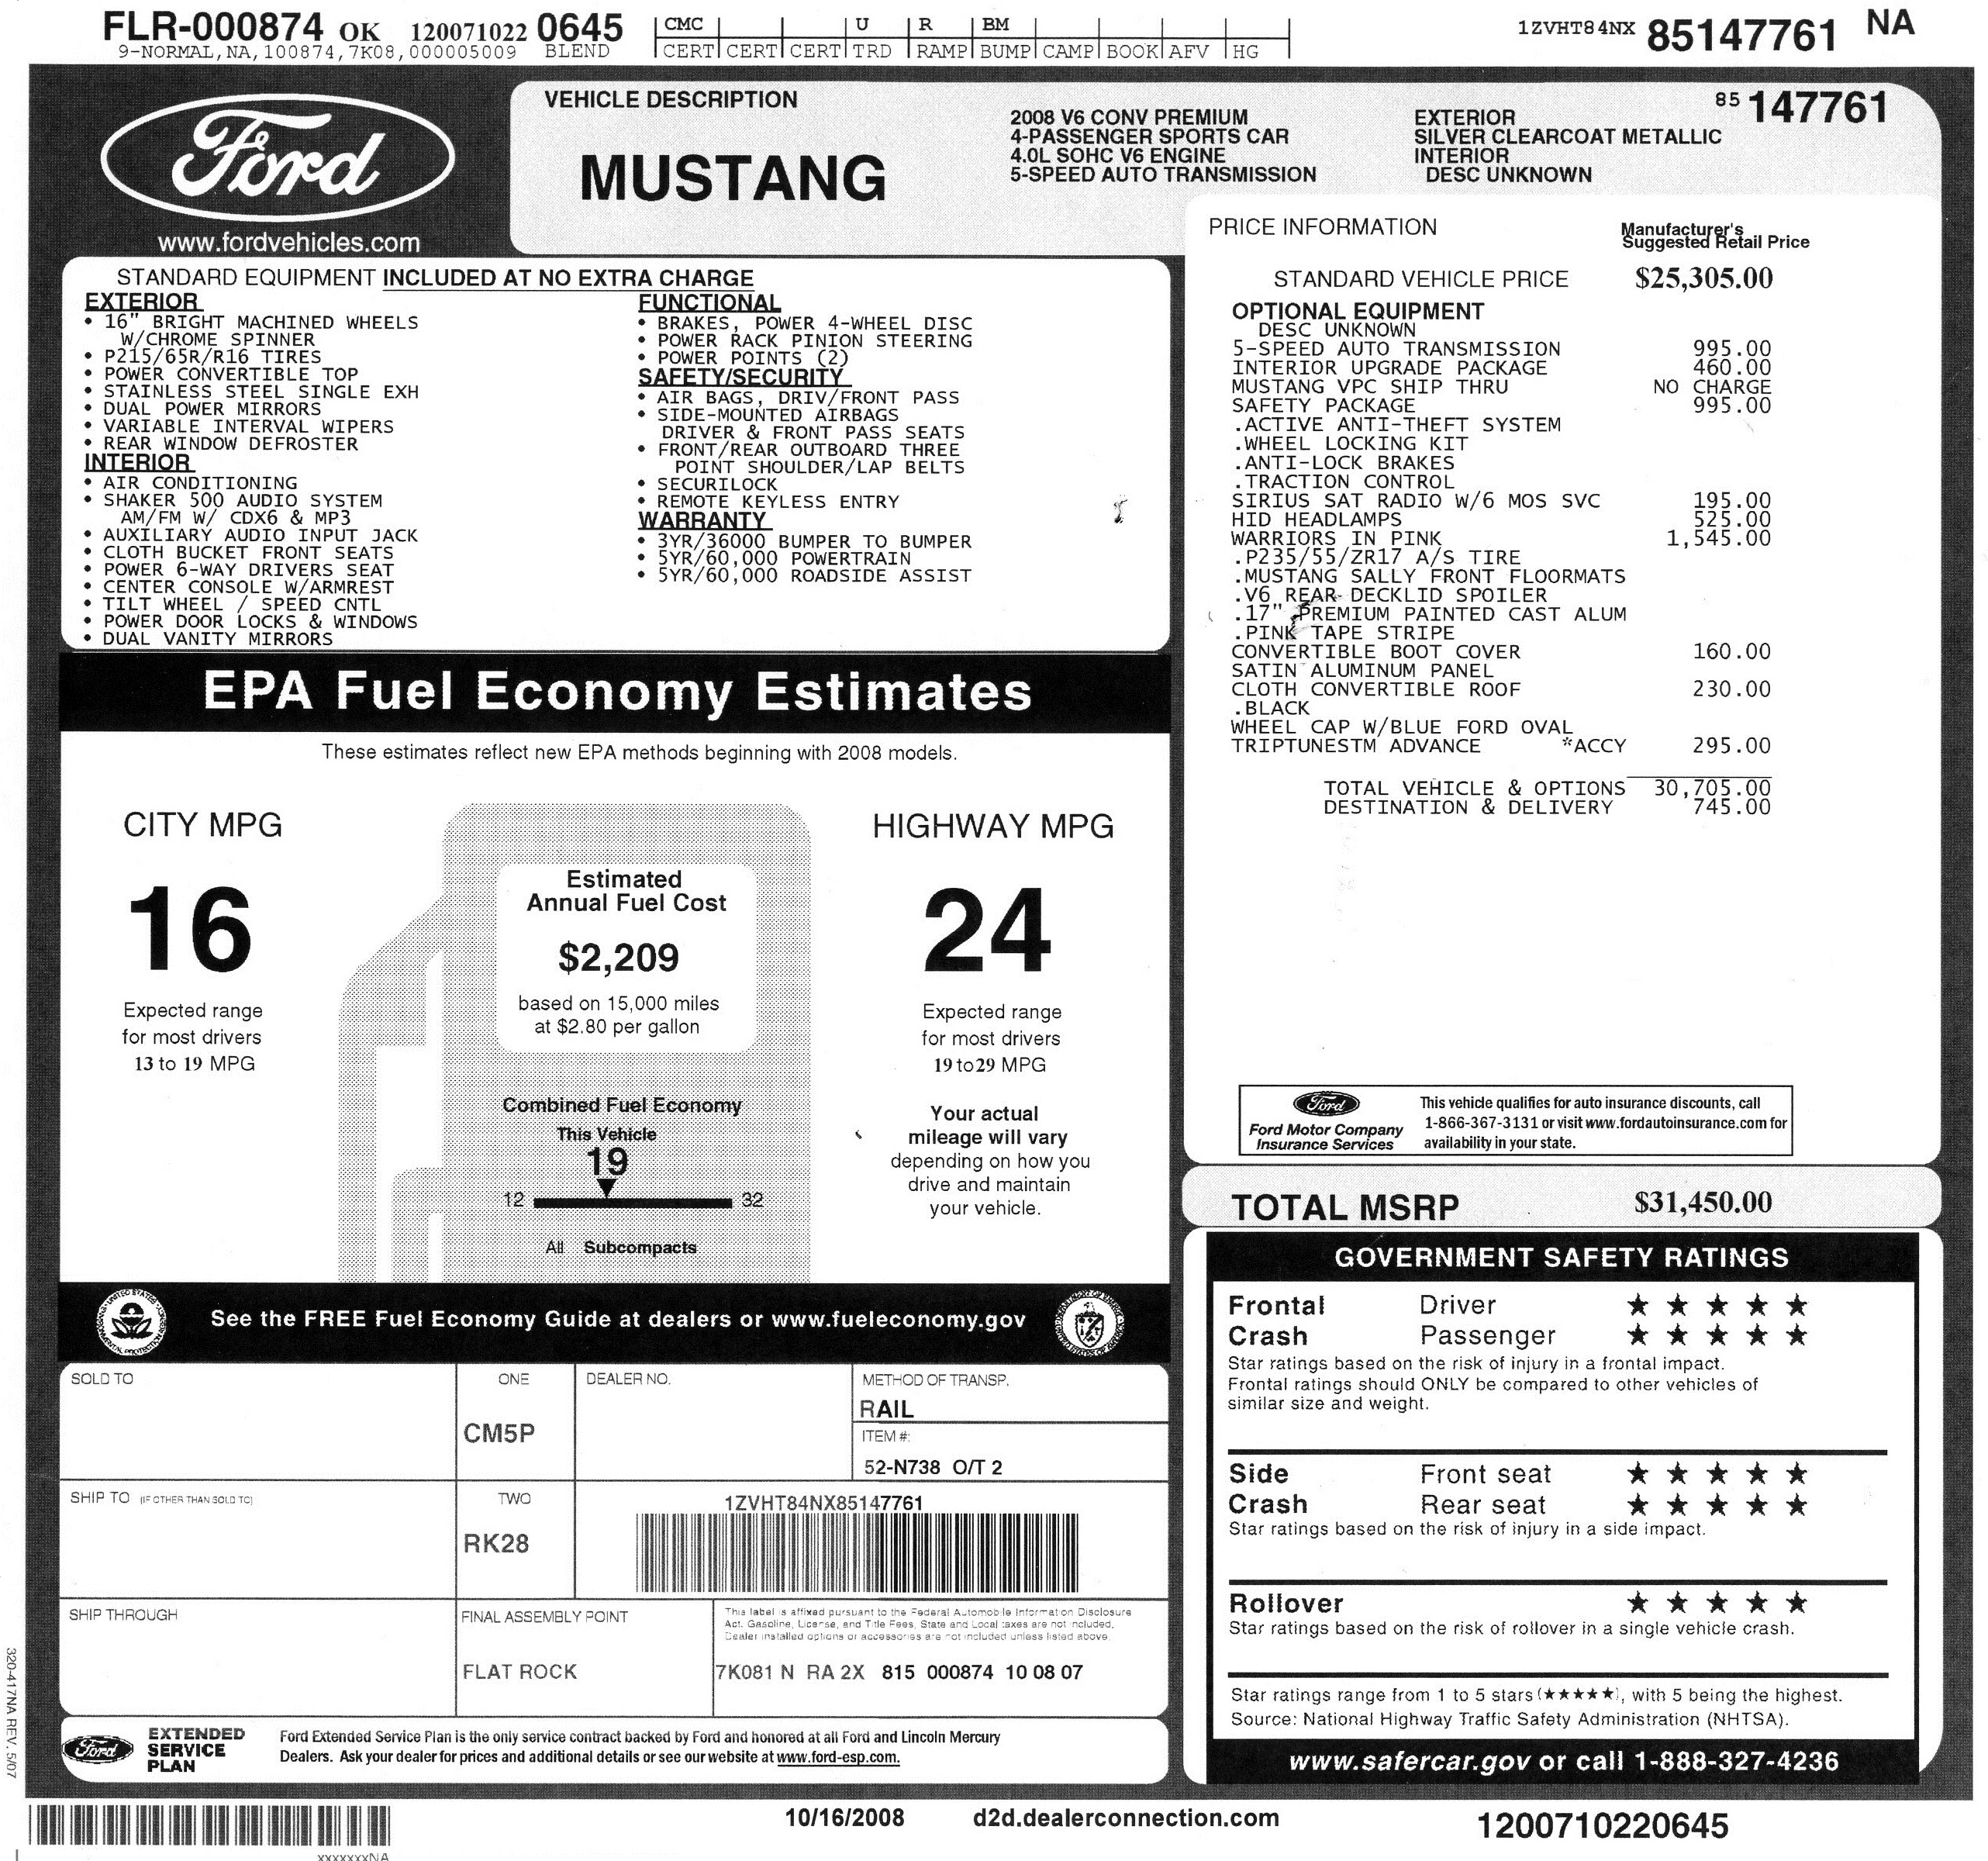 Ford vehicle invoices #7